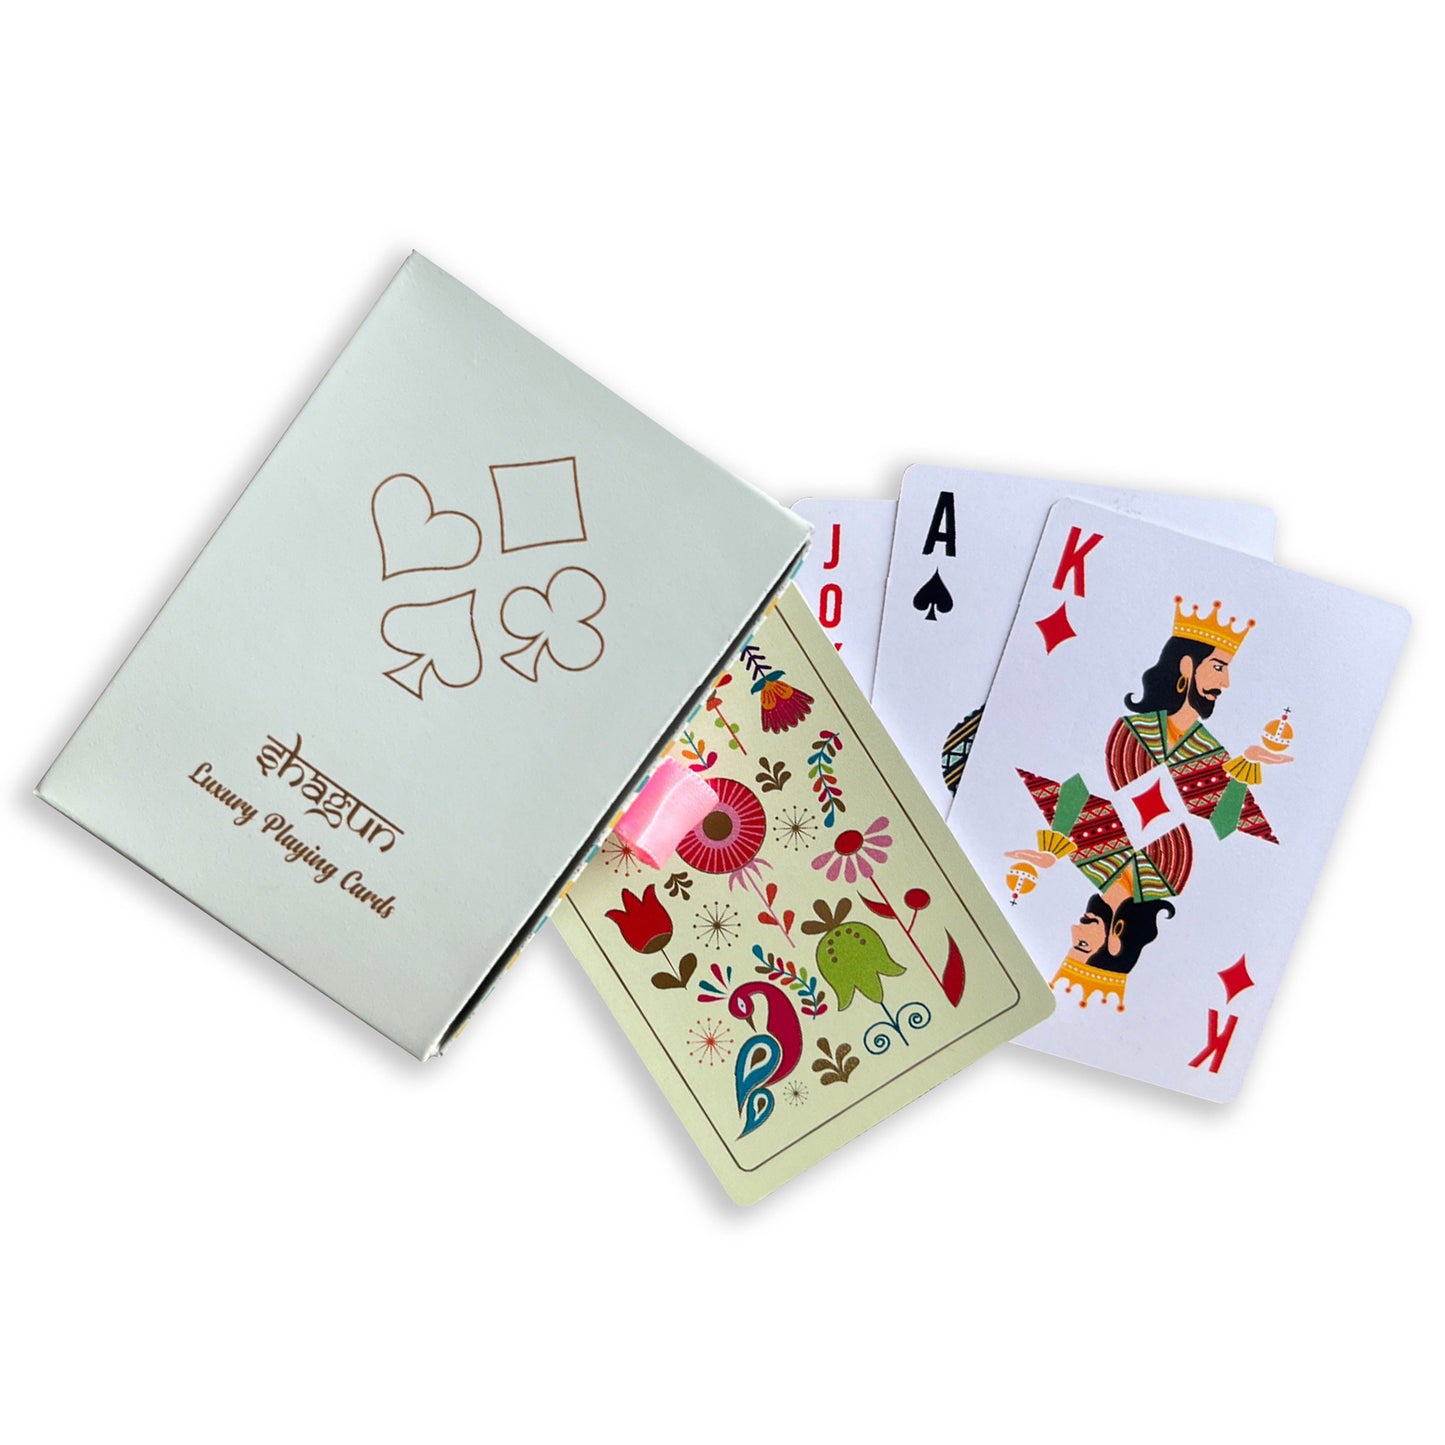 Shagun (Festive) Luxury Playing Cards Playing Cards | Festive Season | Gold Foiled | 55 Cards Deck